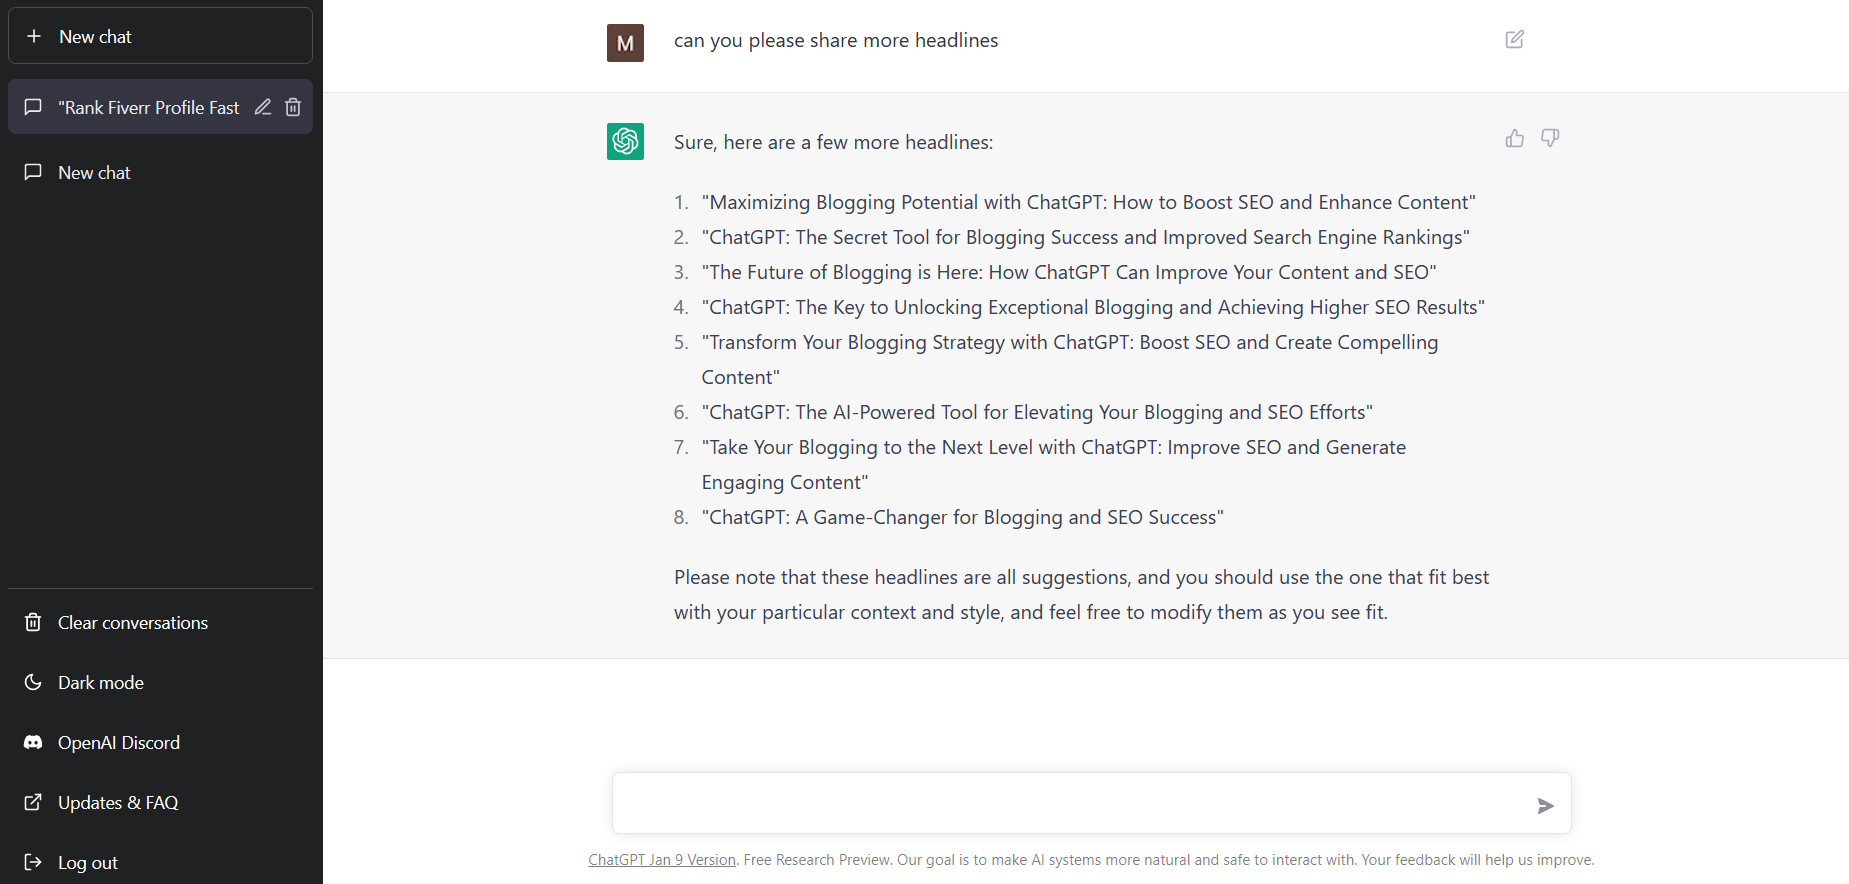 ChatGPT: A Game-Changer for Blogging and SEO Success.